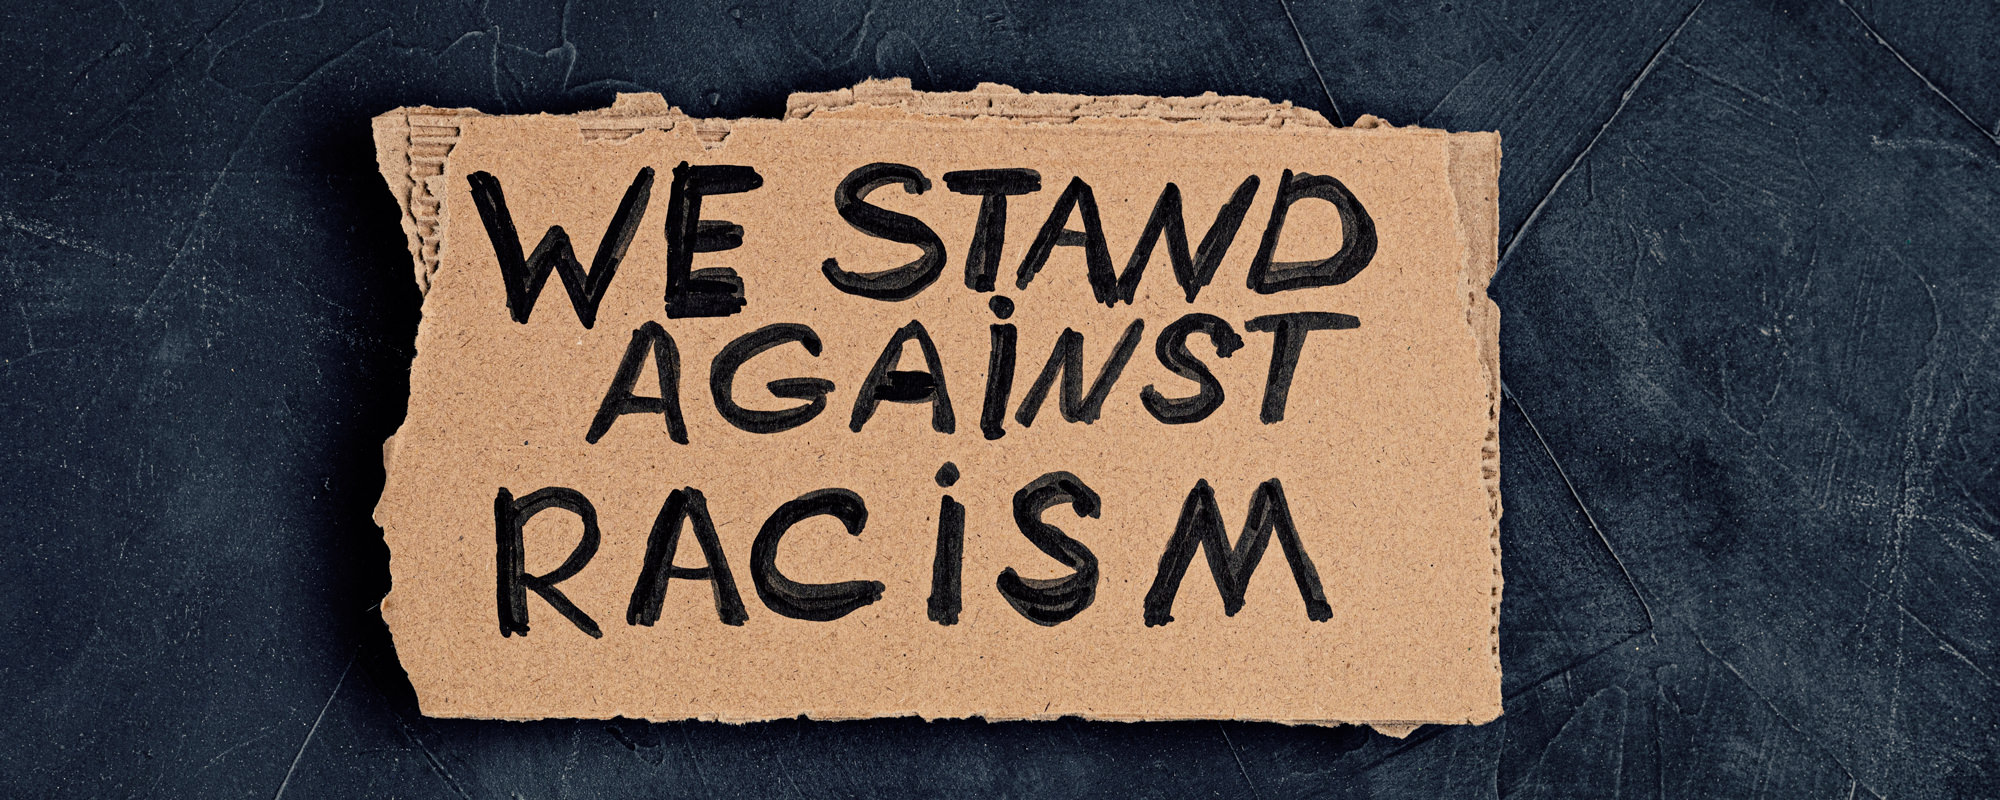 We stand against racism written on cardboard